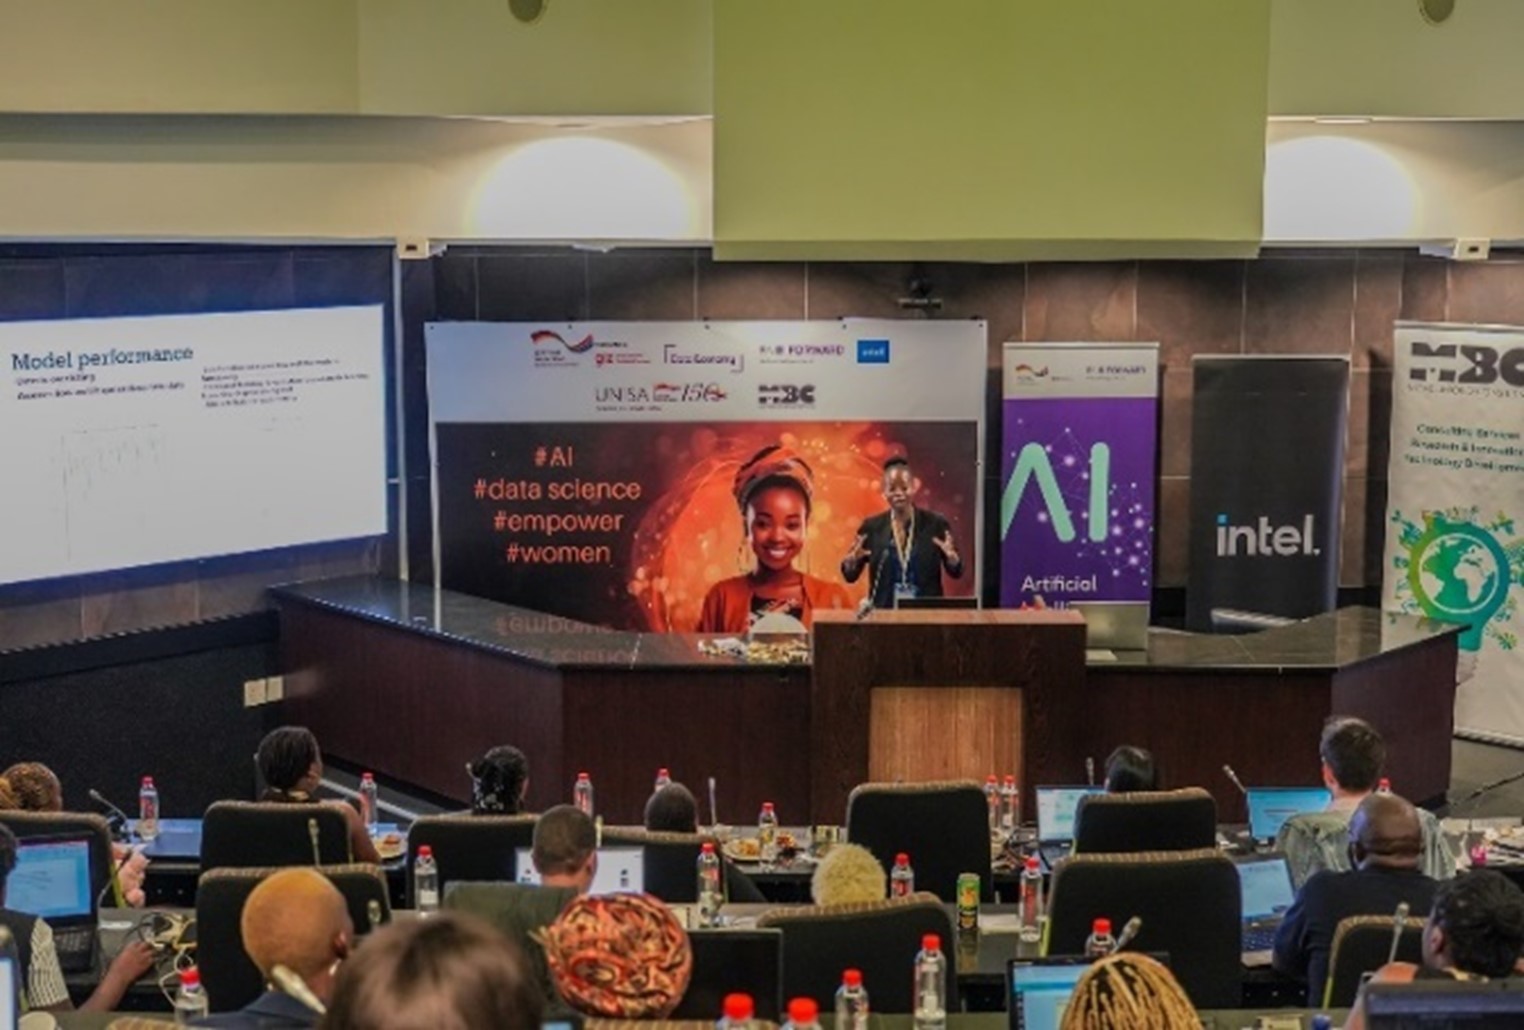 View of auditorium with audience listening to a female speaker on AI topic